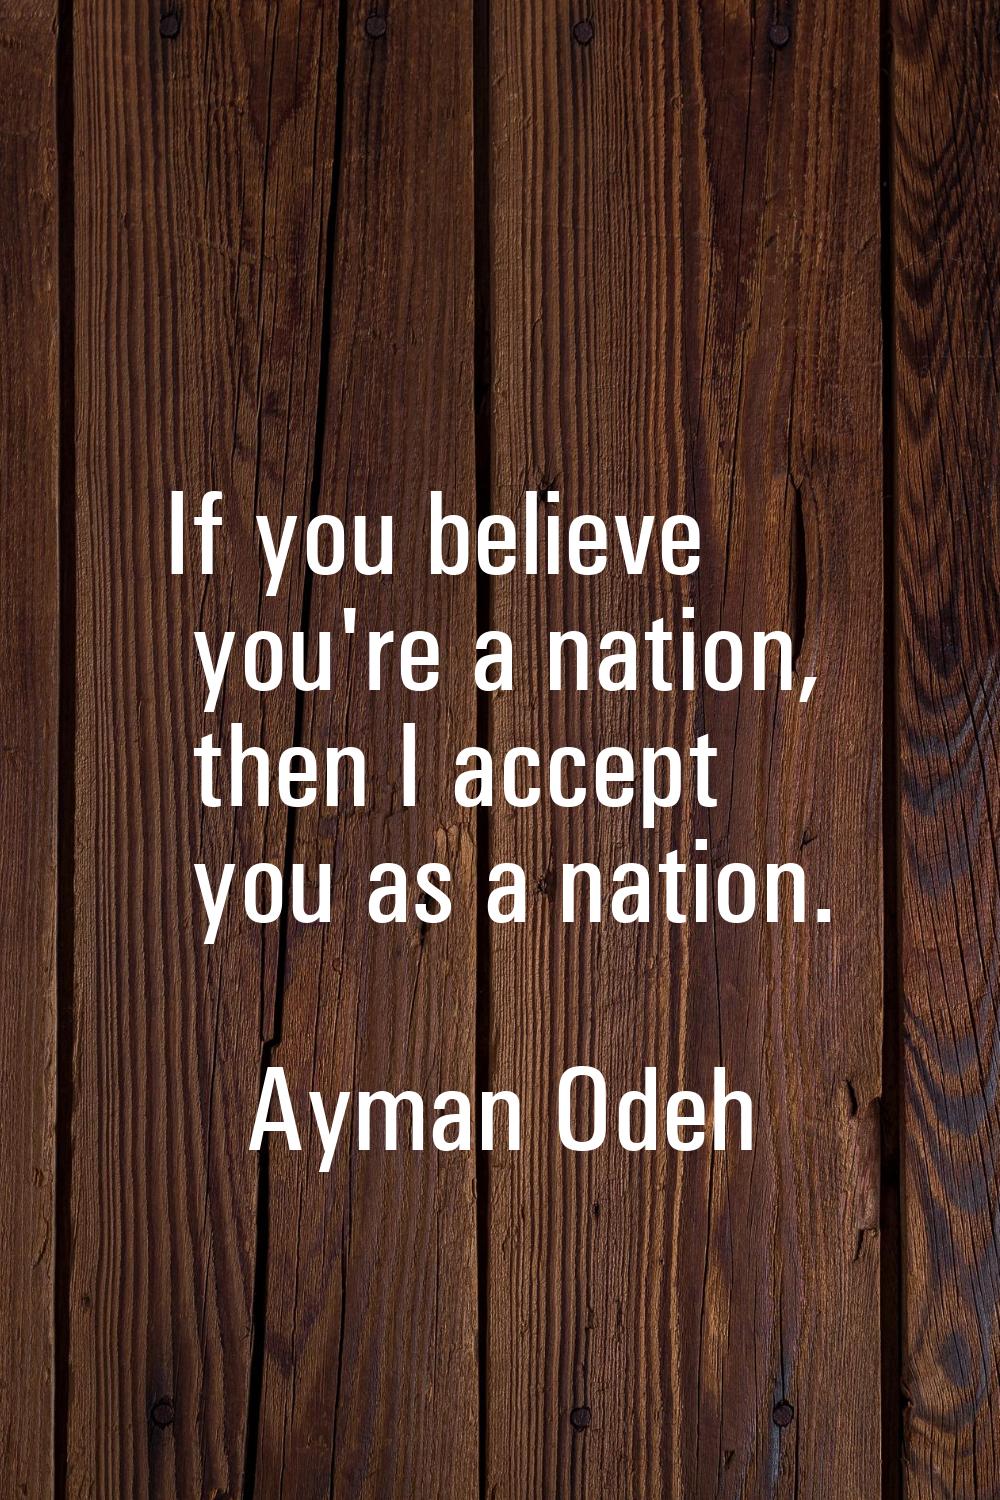 If you believe you're a nation, then I accept you as a nation.